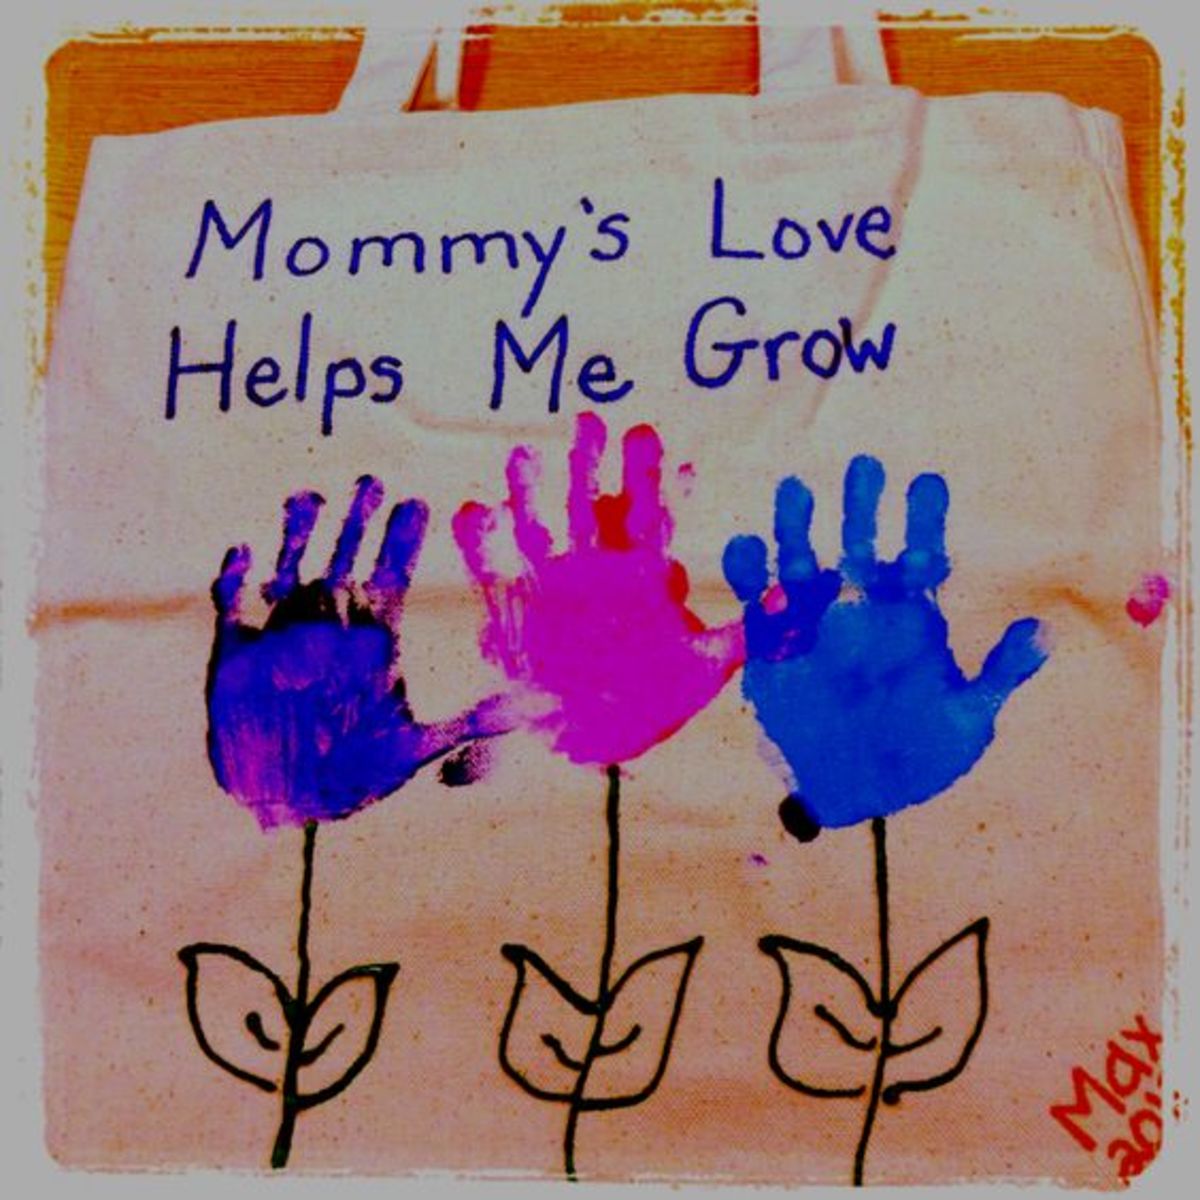 "Mommy's Love" Tote